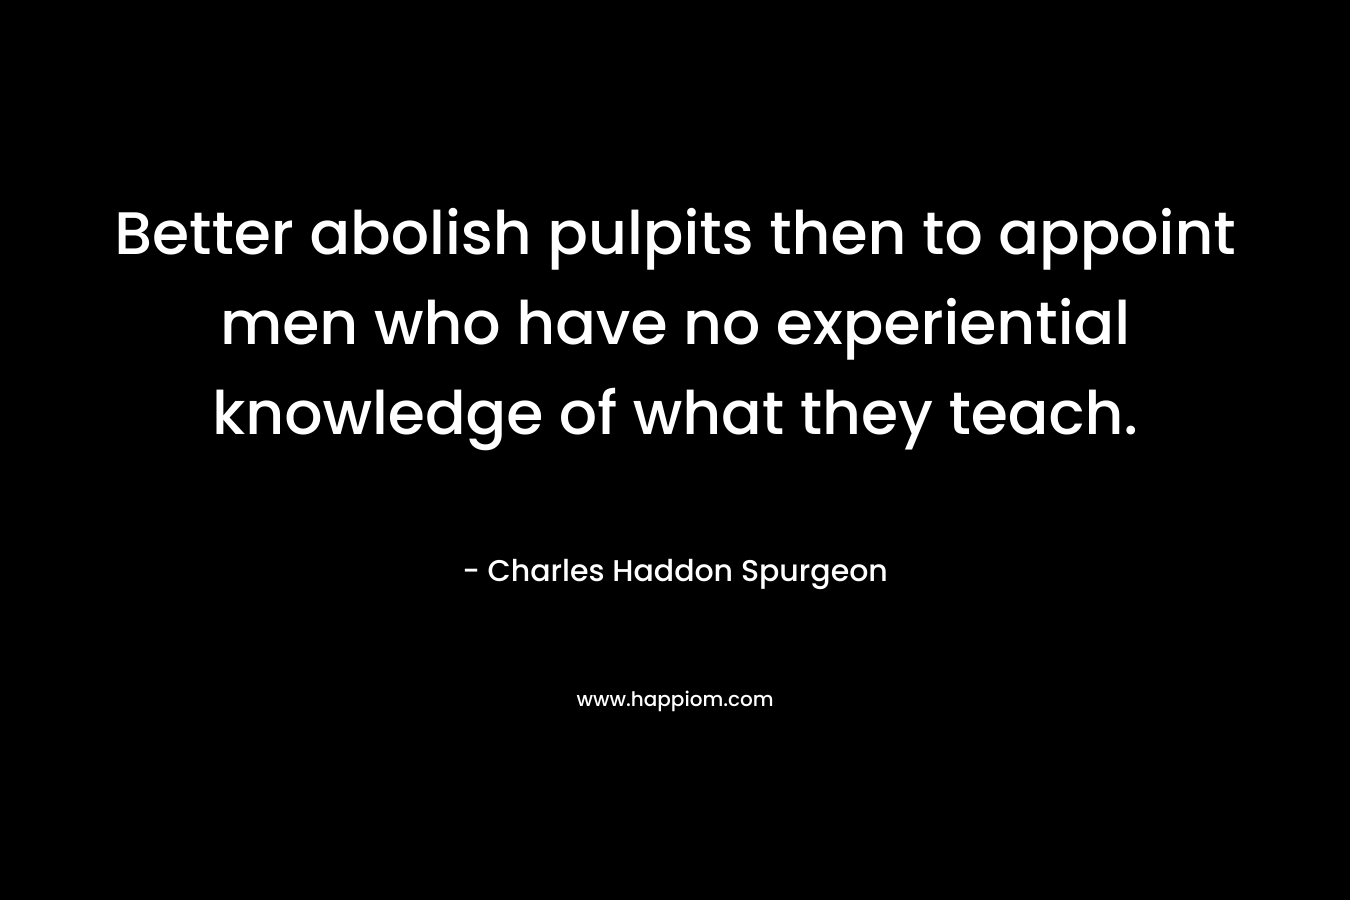 Better abolish pulpits then to appoint men who have no experiential knowledge of what they teach.